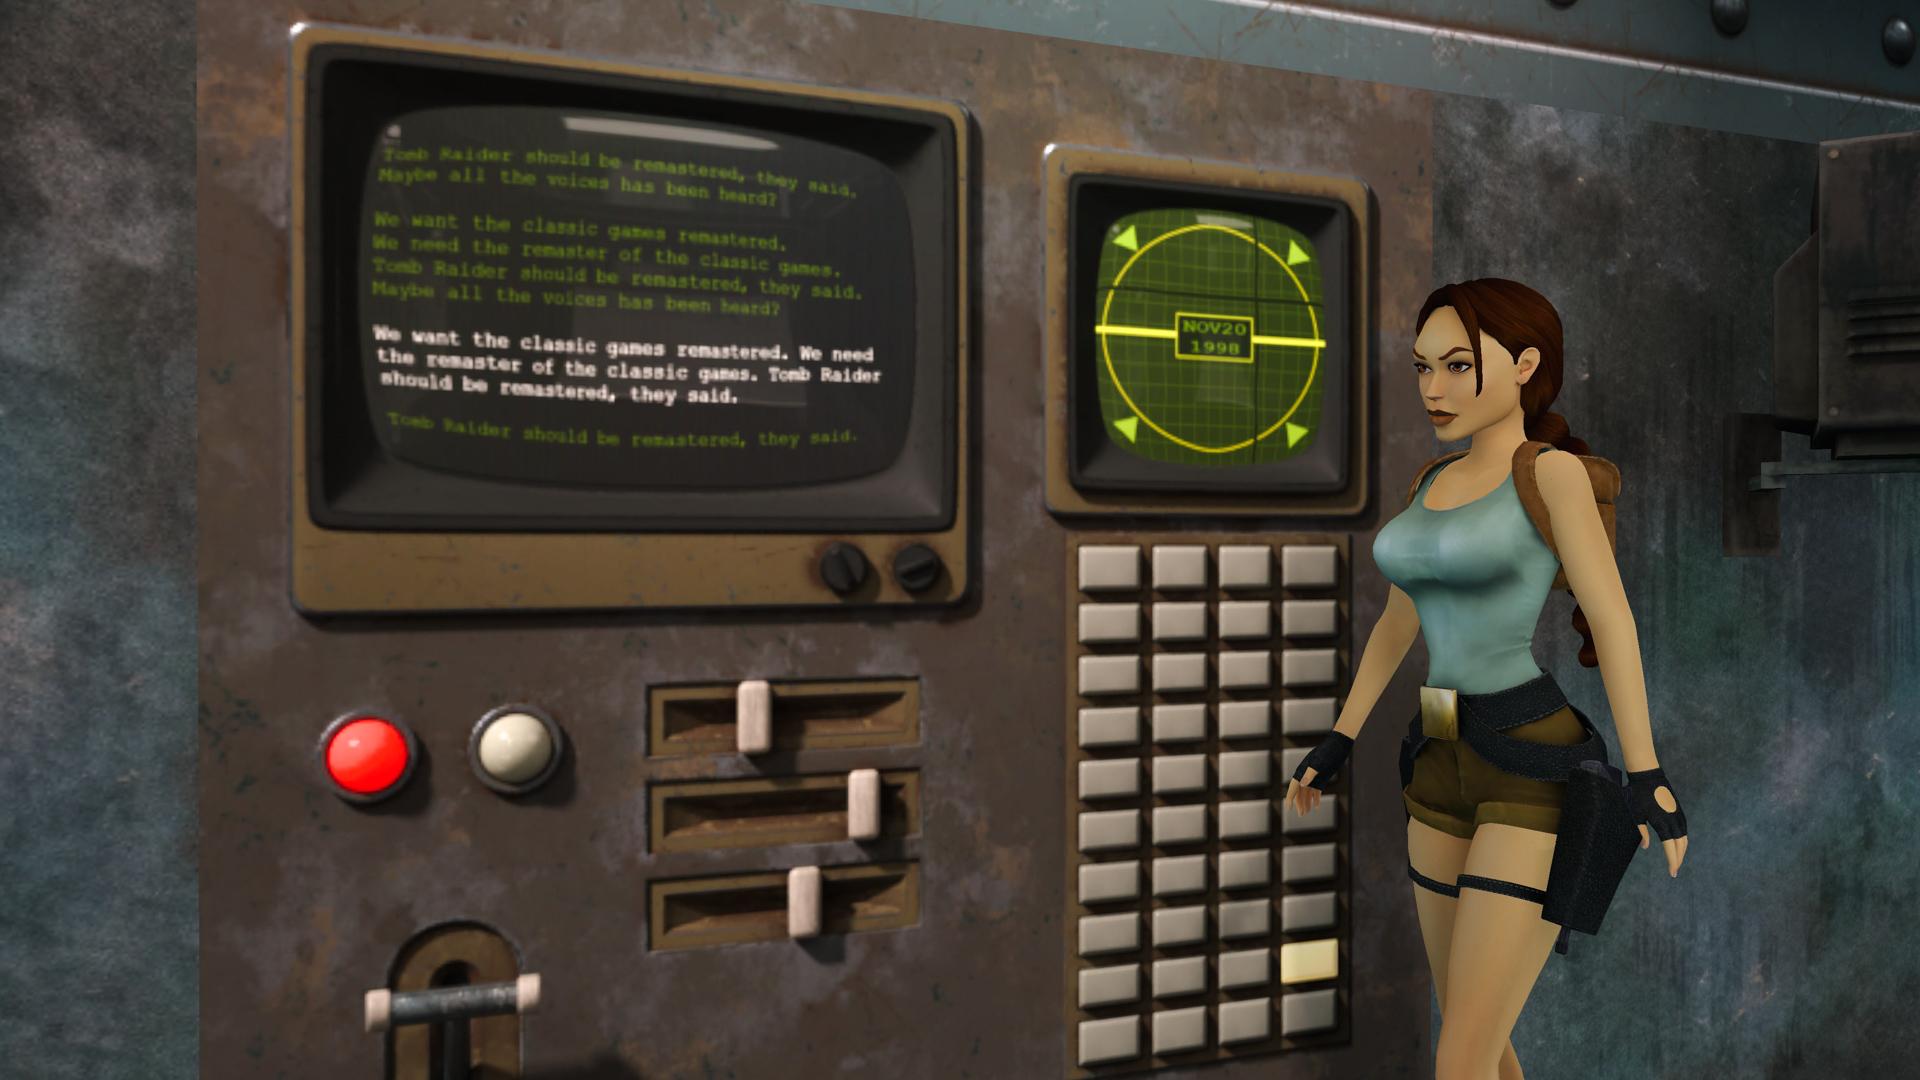 Lara next to a screen with a text depicting the fans being vocal about wanting remasters in the level Offshore Rig